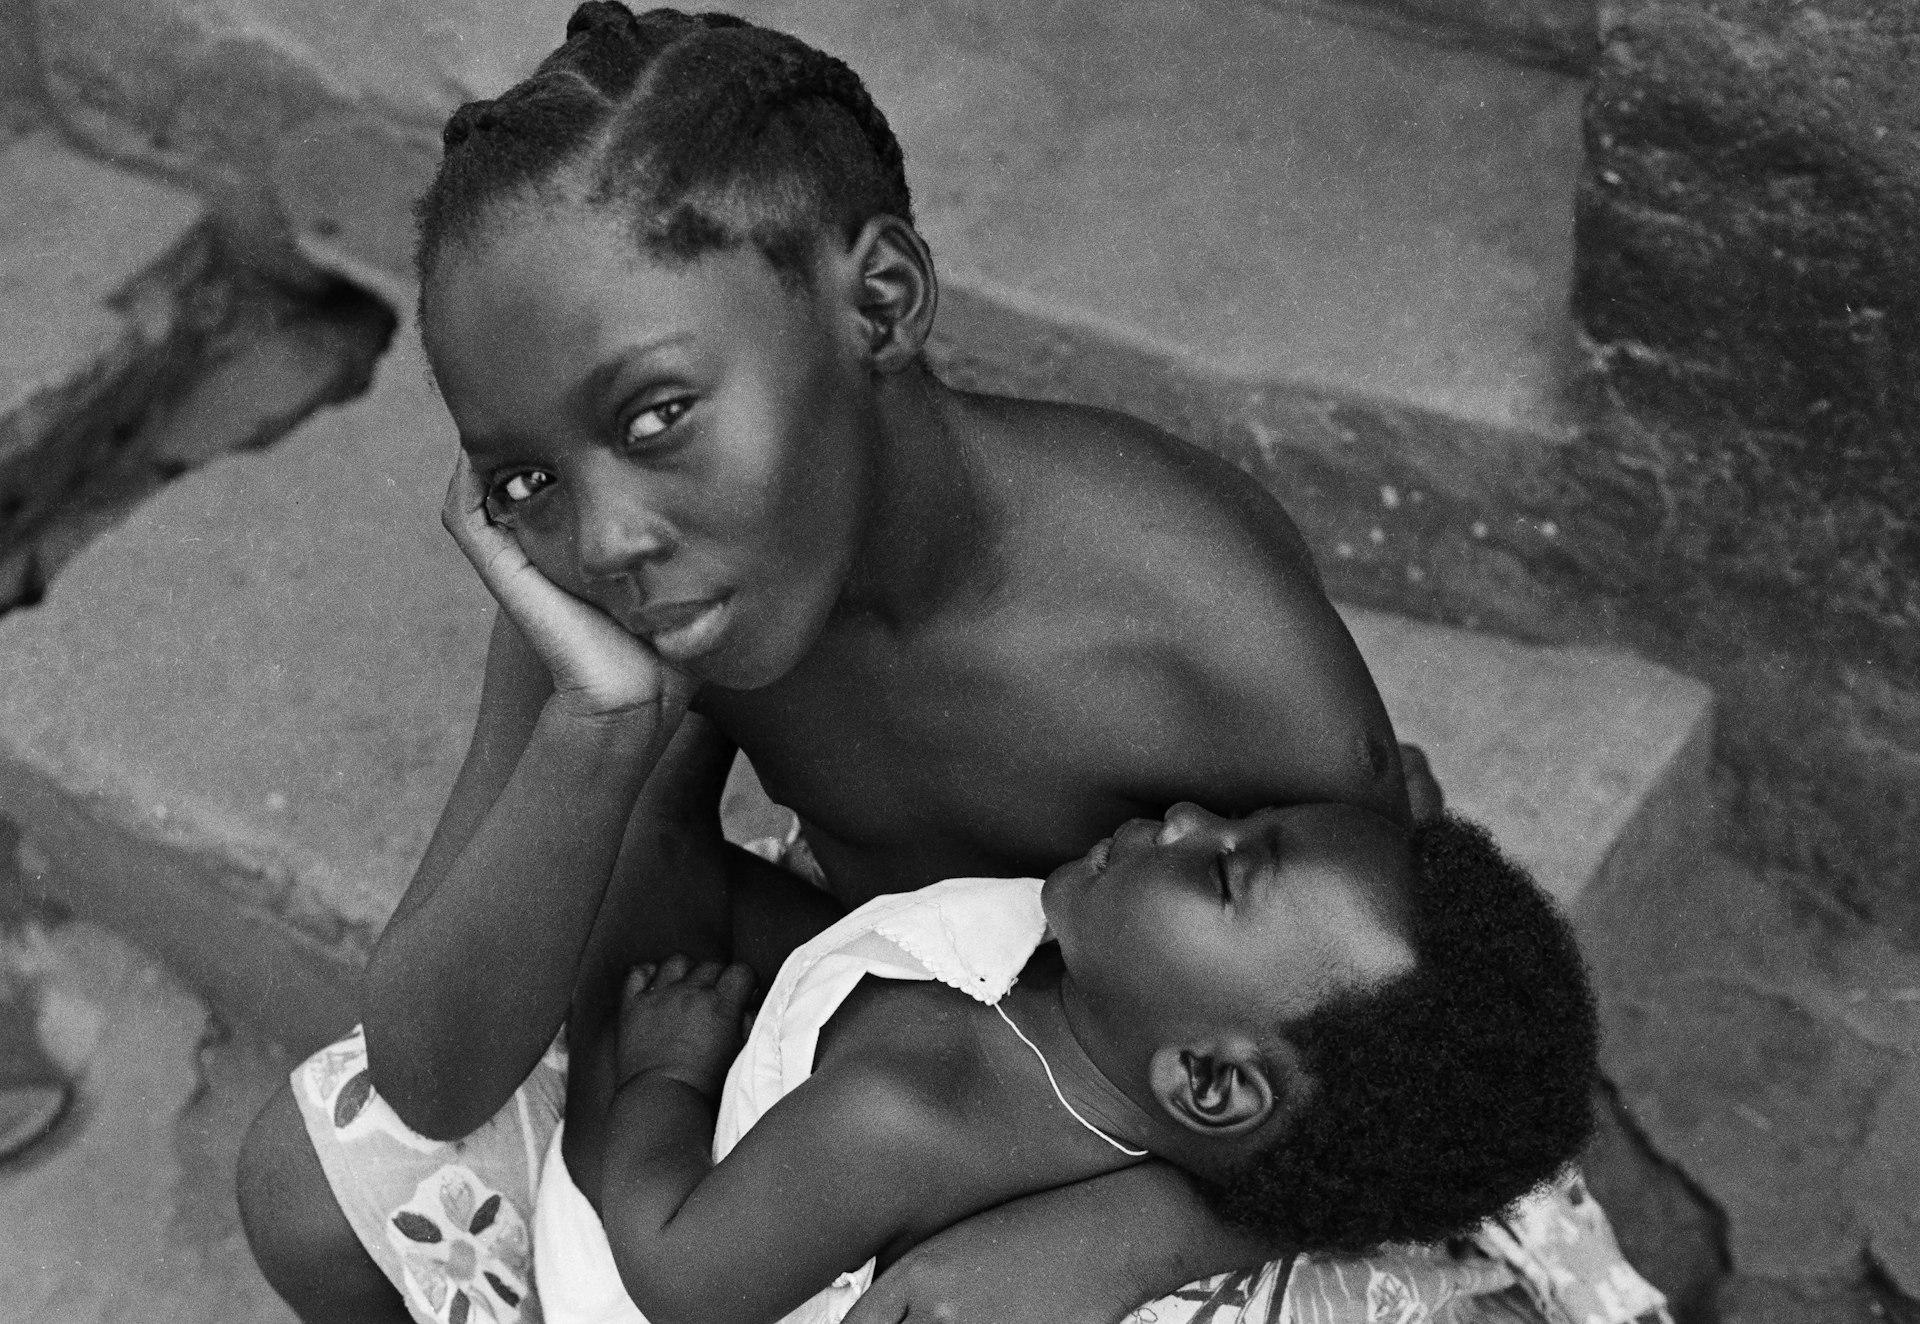 Groundbreaking photos of Ghanaian society and culture